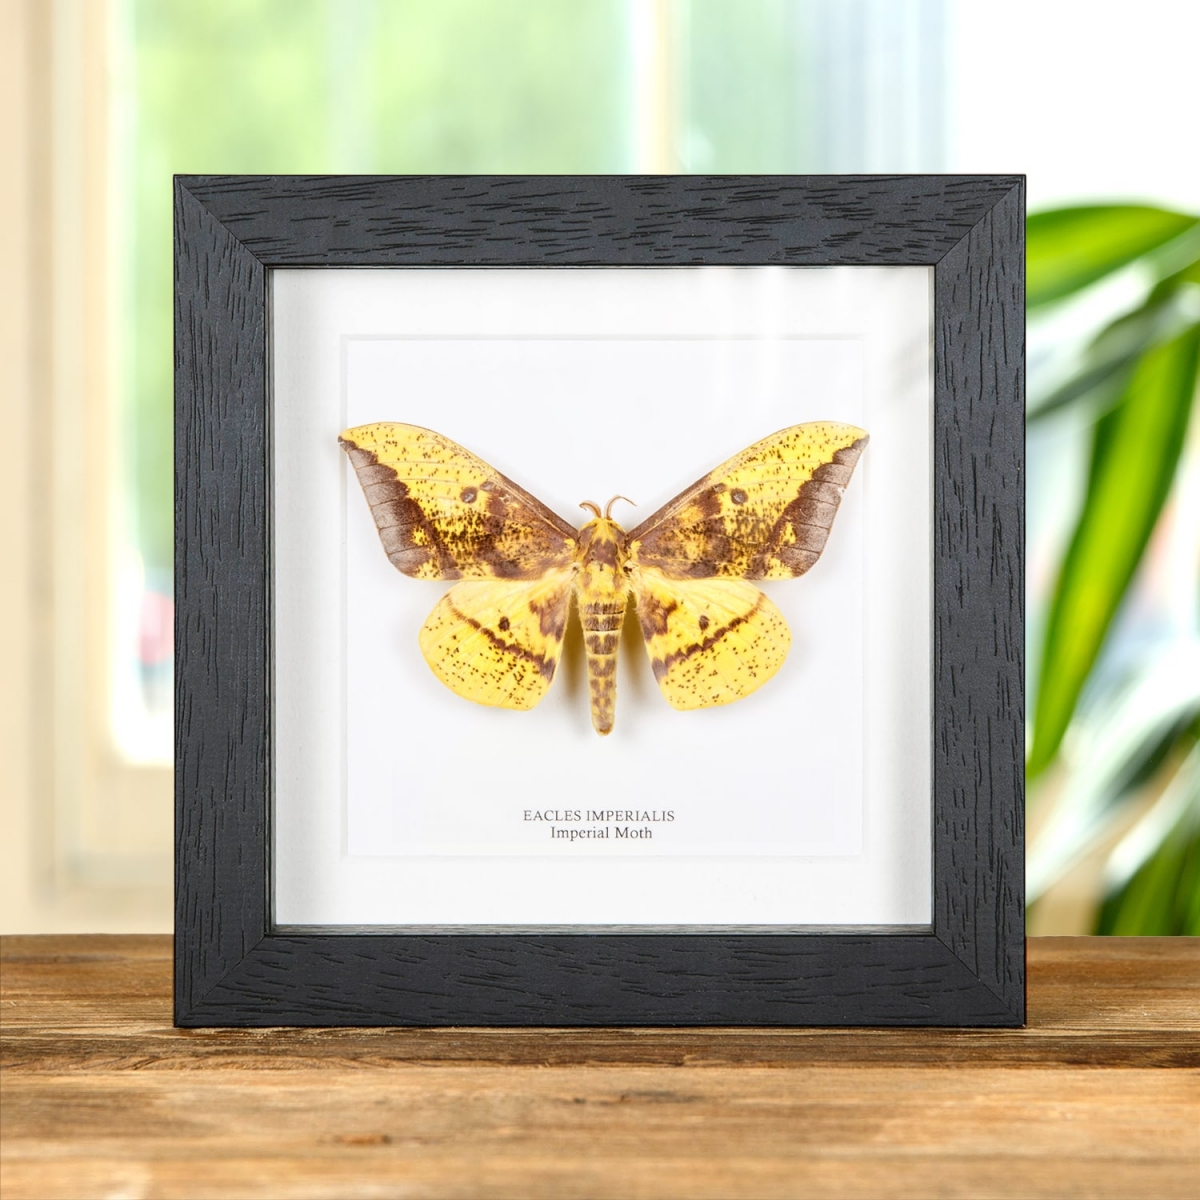 Minibeast Imperial Moth in Box Frame (Eacles imperialis)